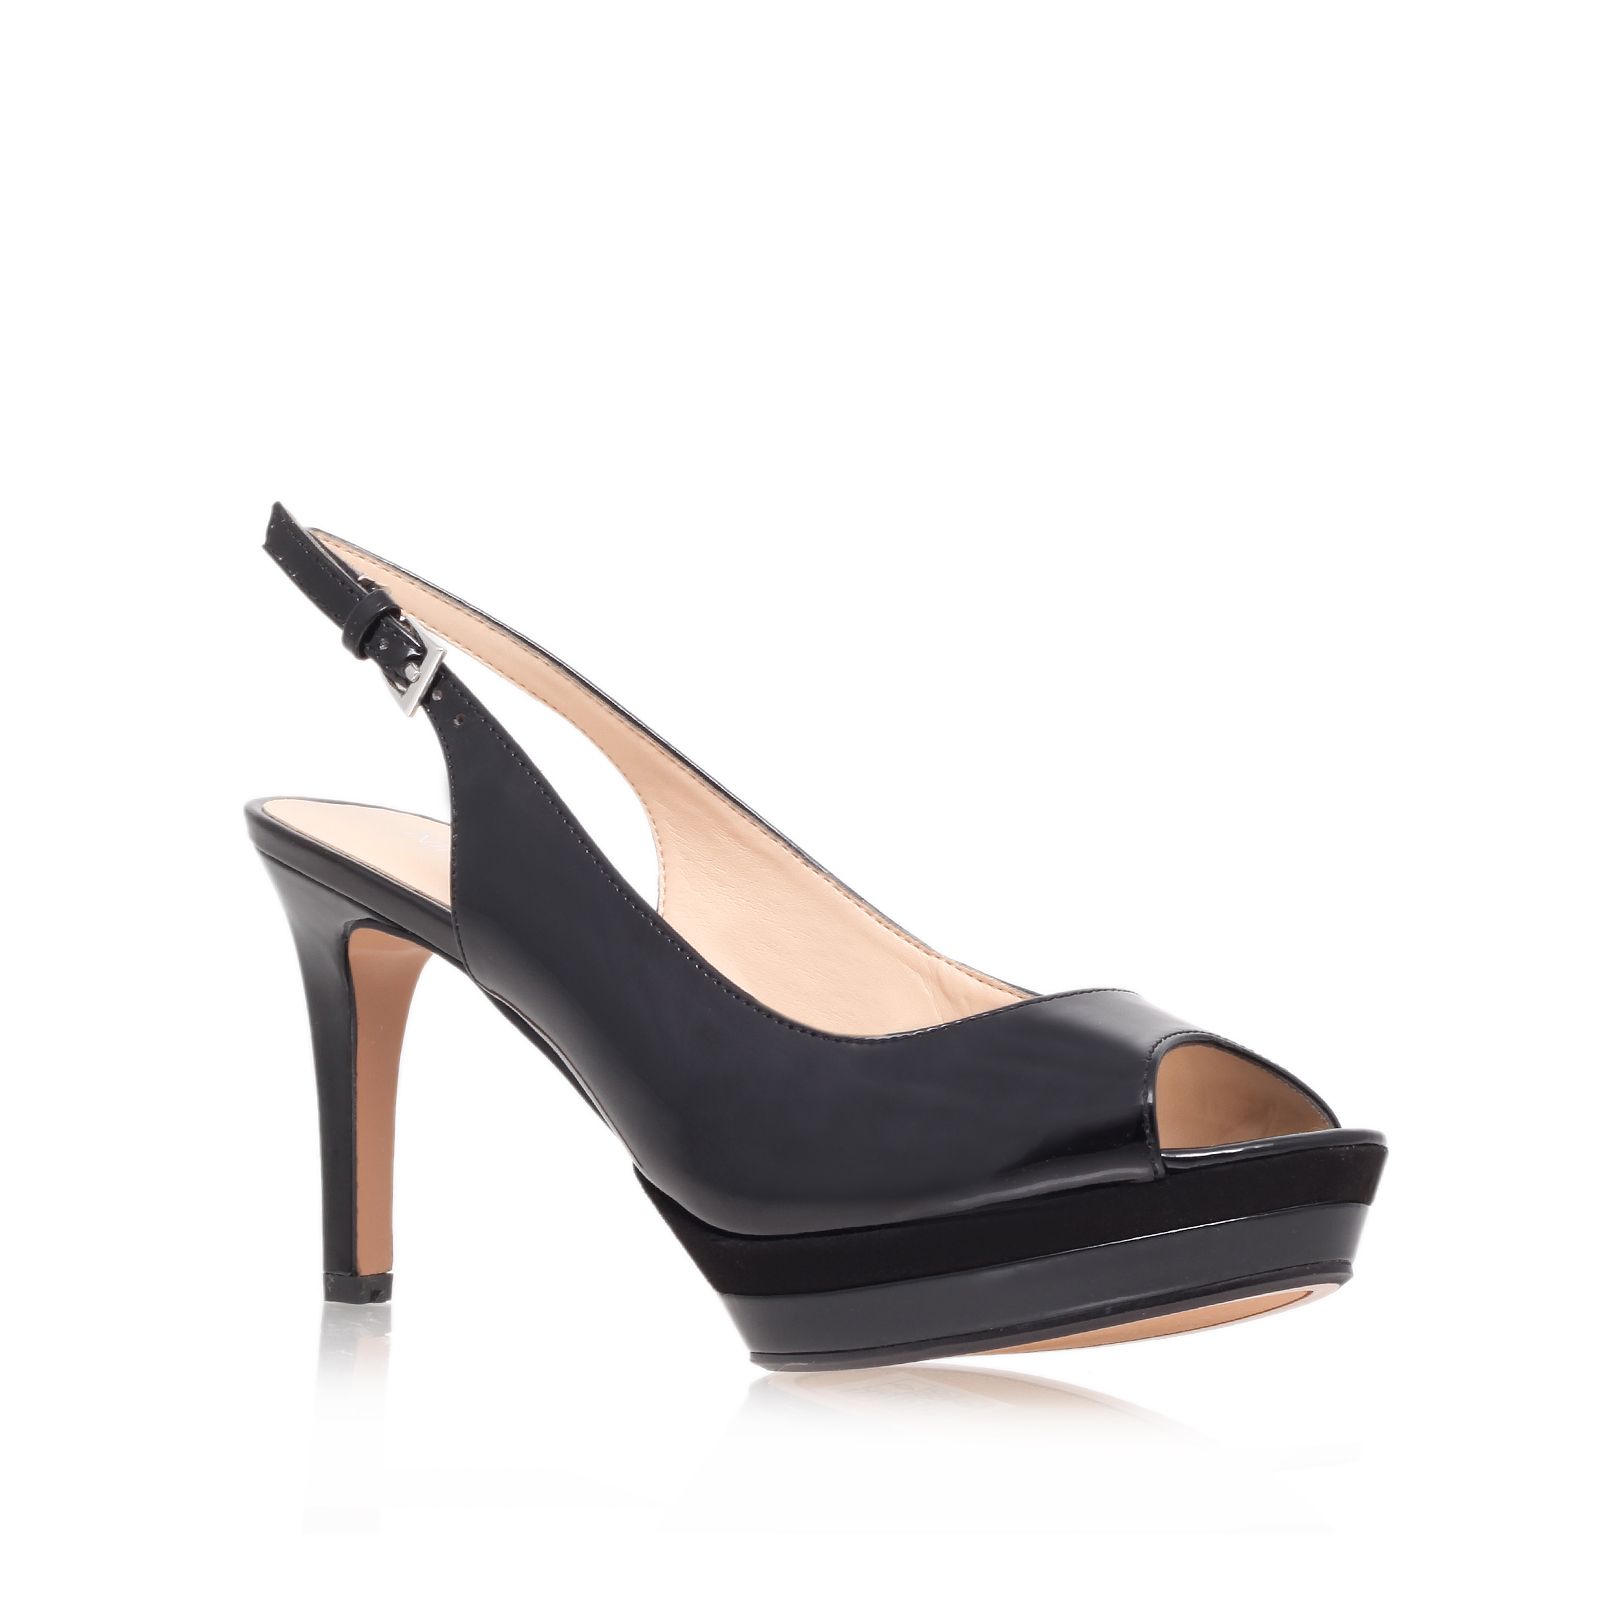 Nine west able23 high heel court shoes. , court shoes , high (80mm and ...